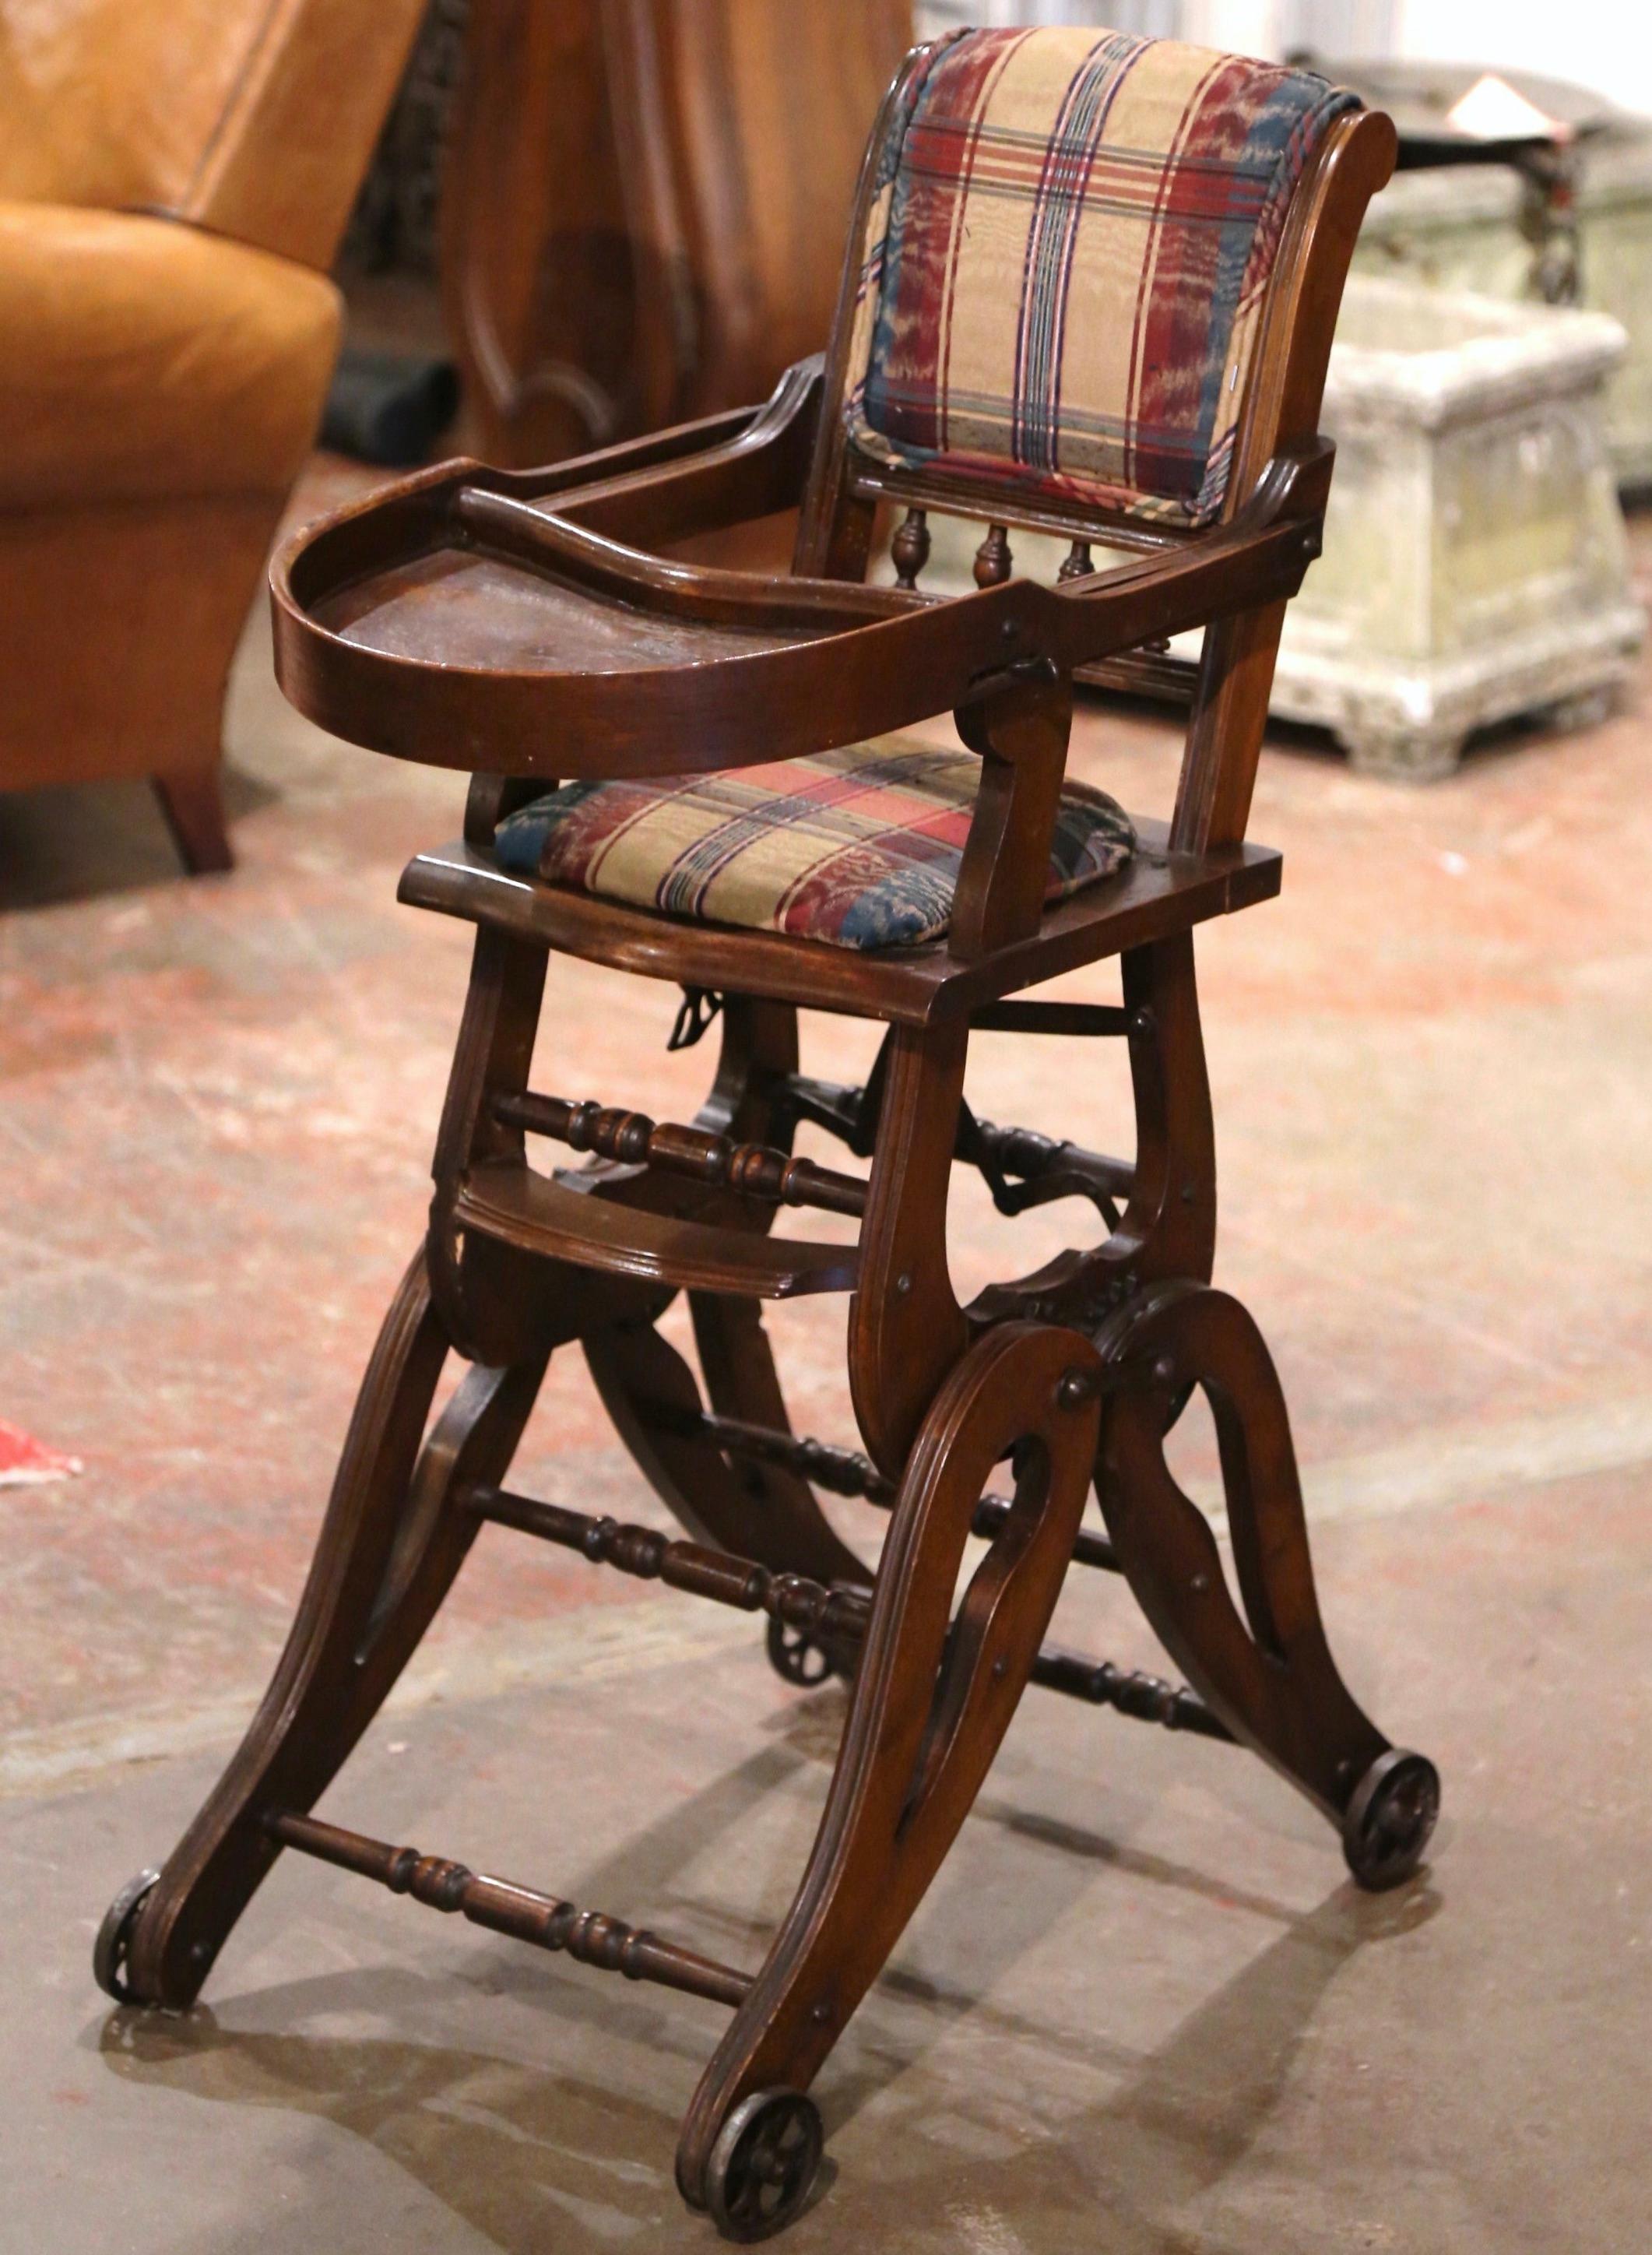 Victorian 19th Century English Carved Walnut and Fabric Convertible High Chair to Rocker For Sale